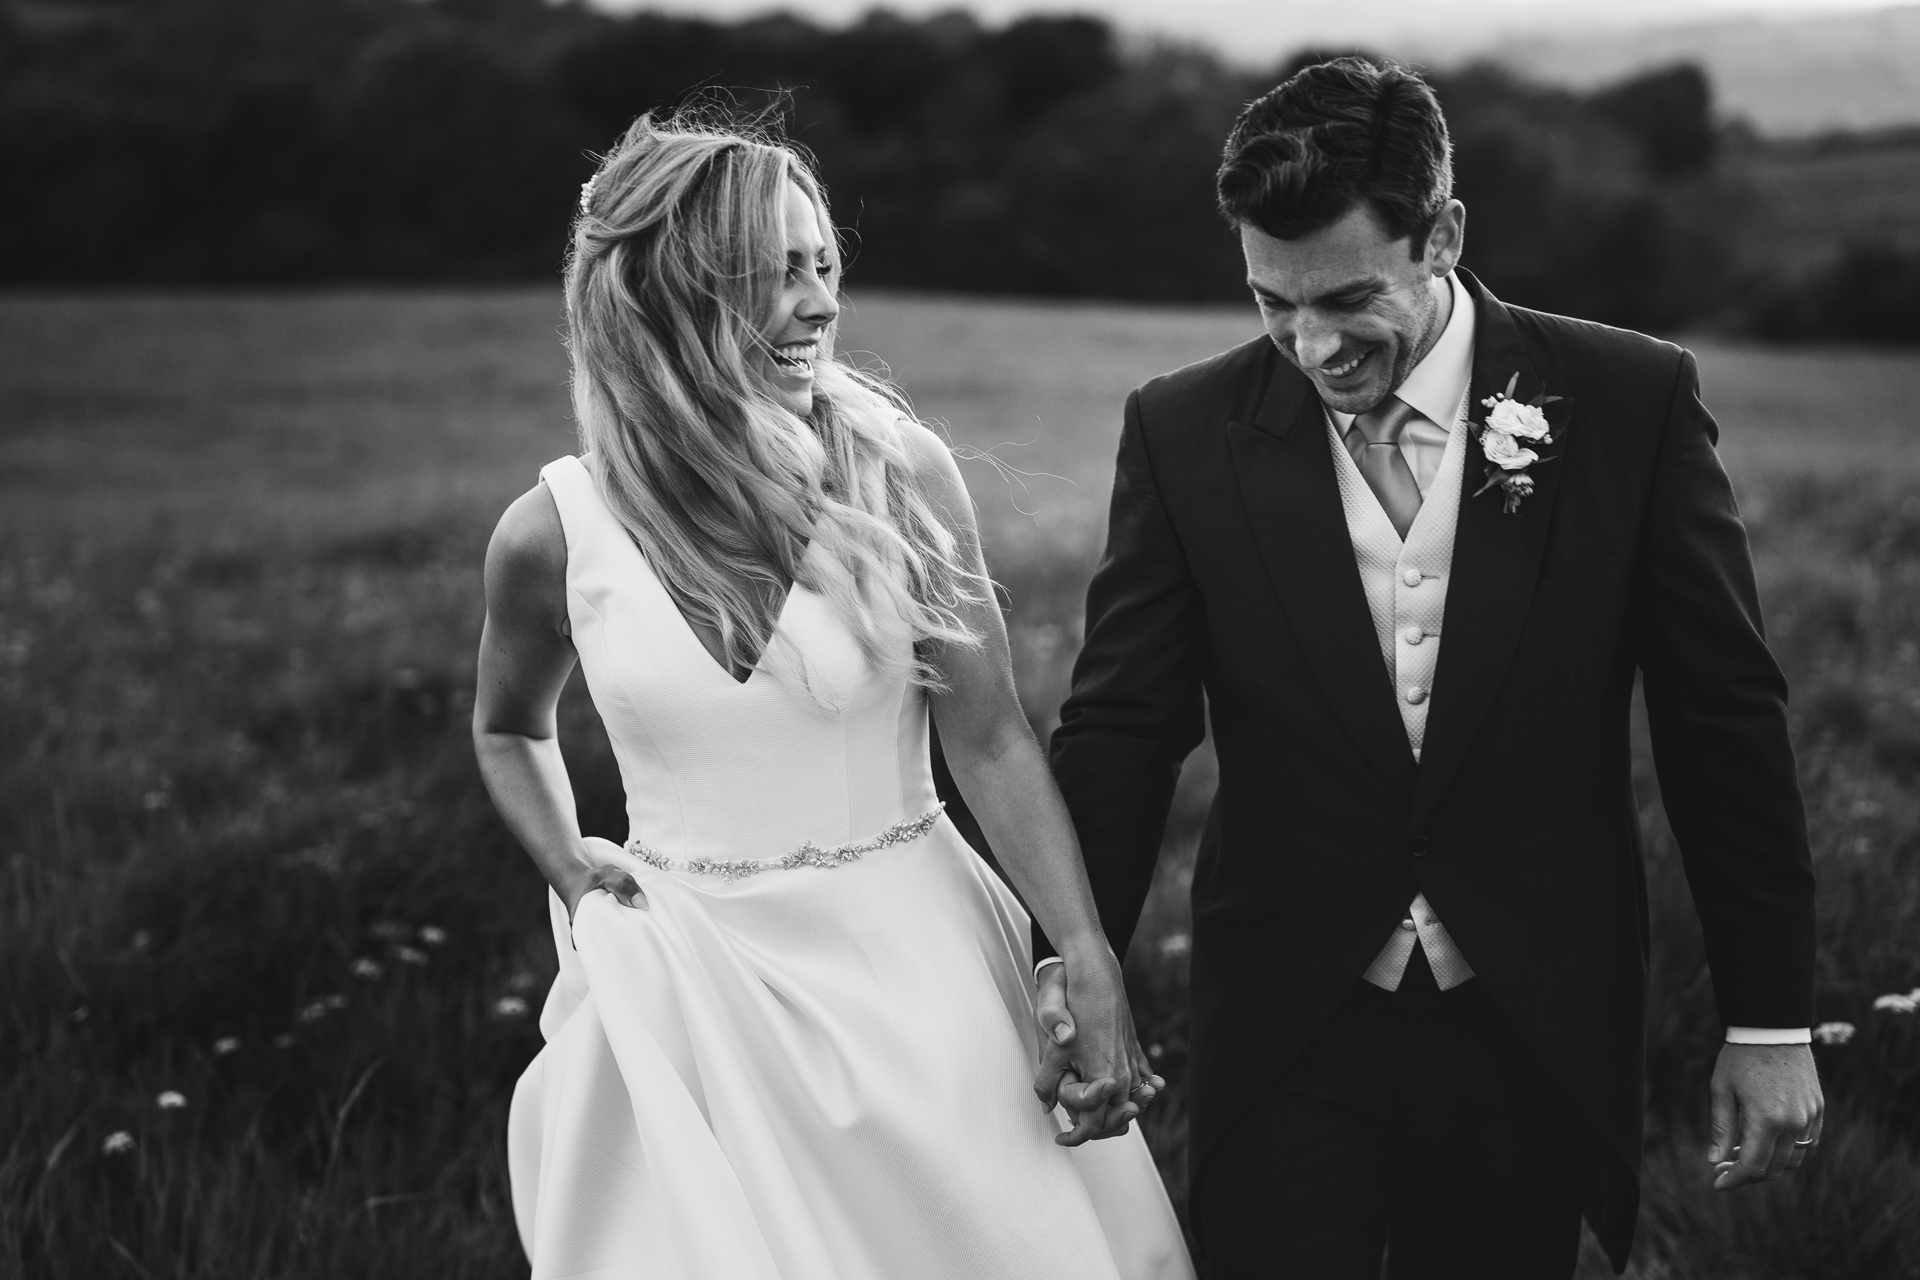 Black & white image of a bride and groom walking hand in hand across a field and smiling at each other